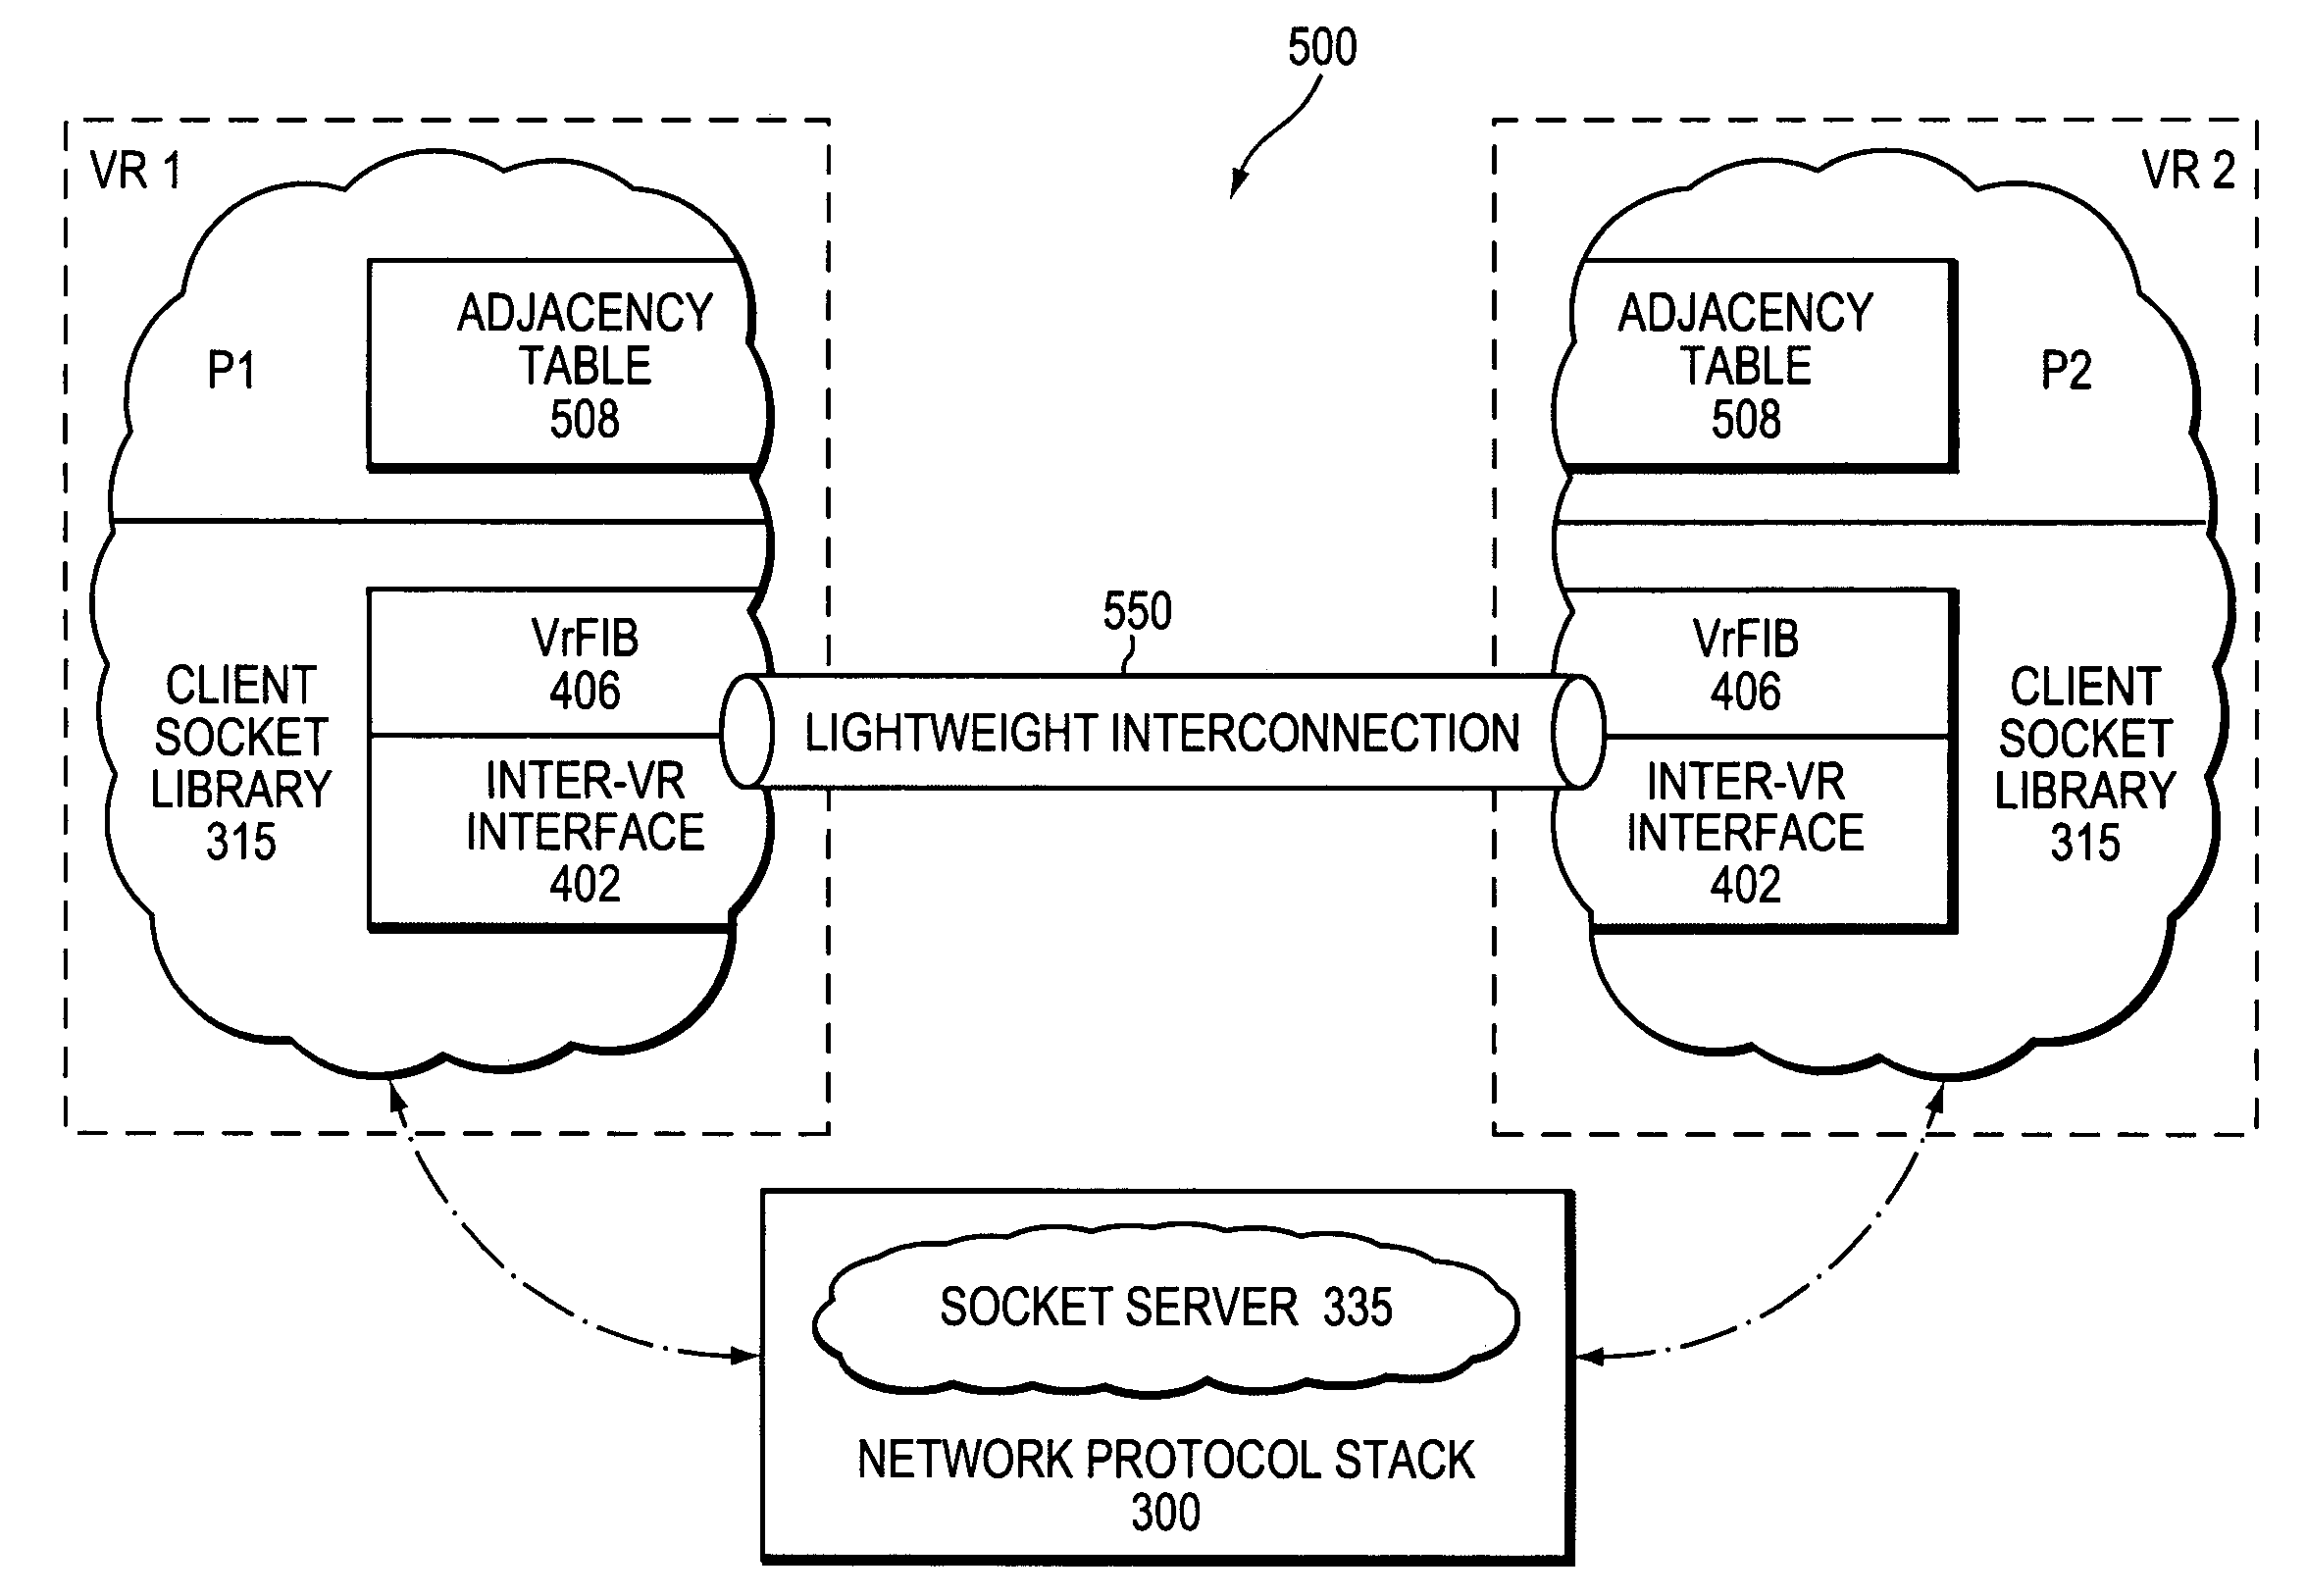 Communication arrangement between virtual routers of a physical router